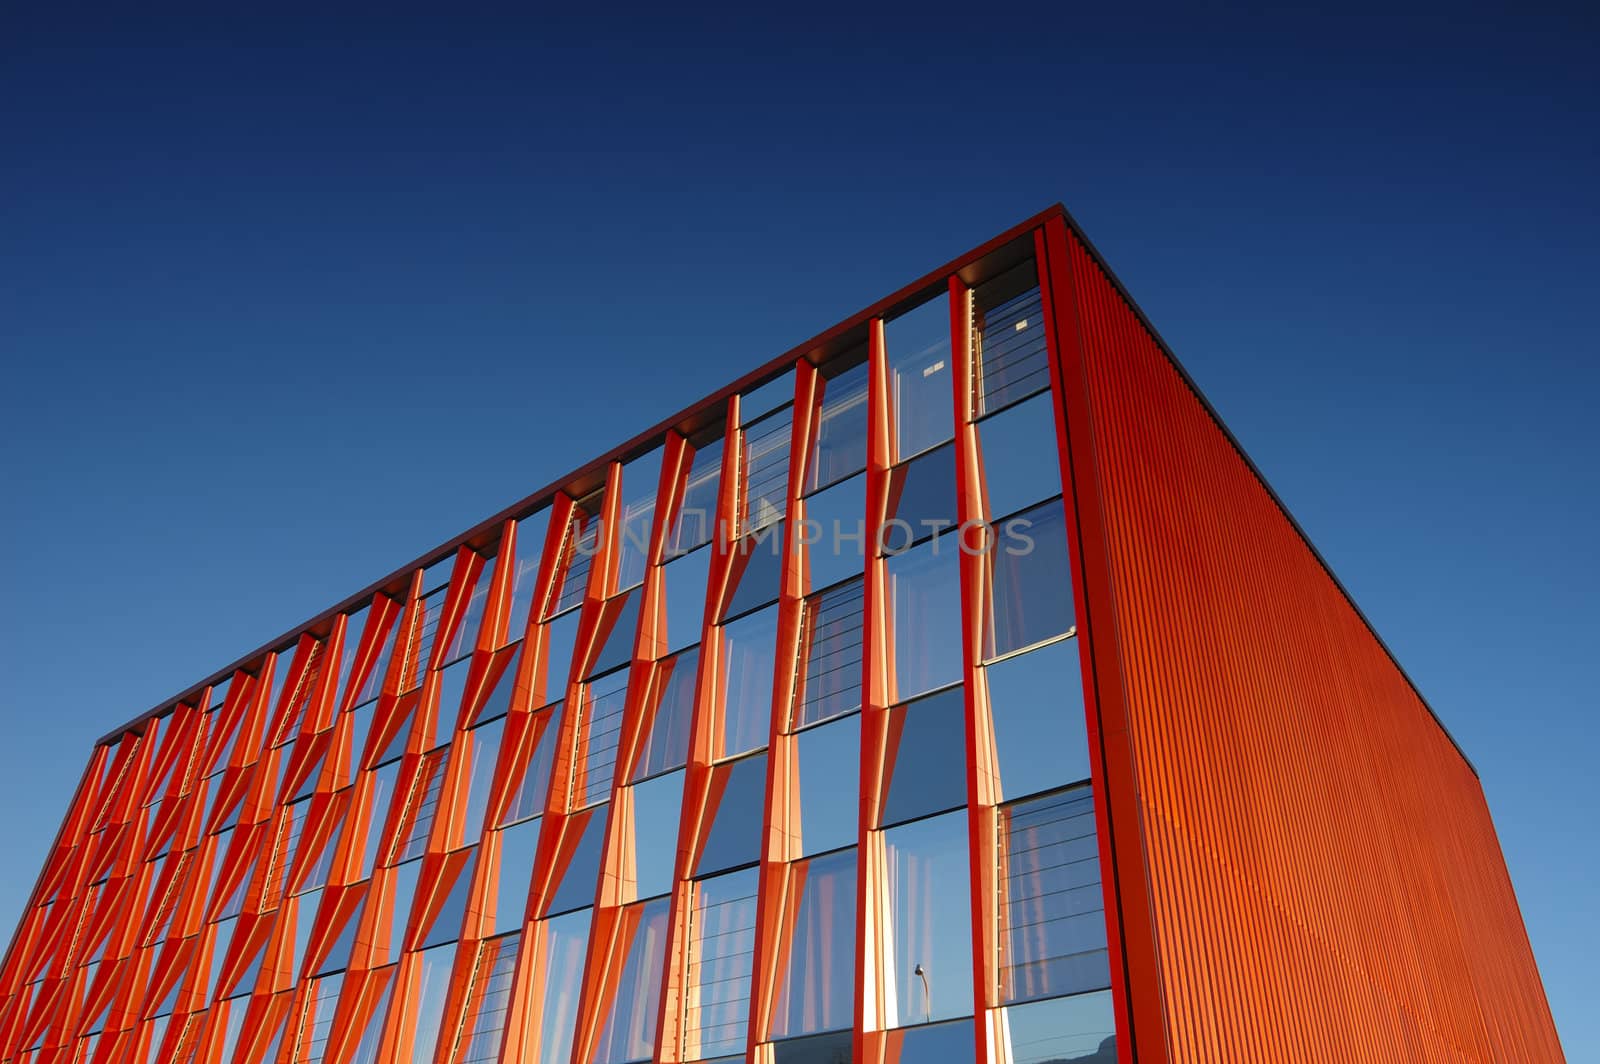 An orange office block standing out strongly against a clear blue sky